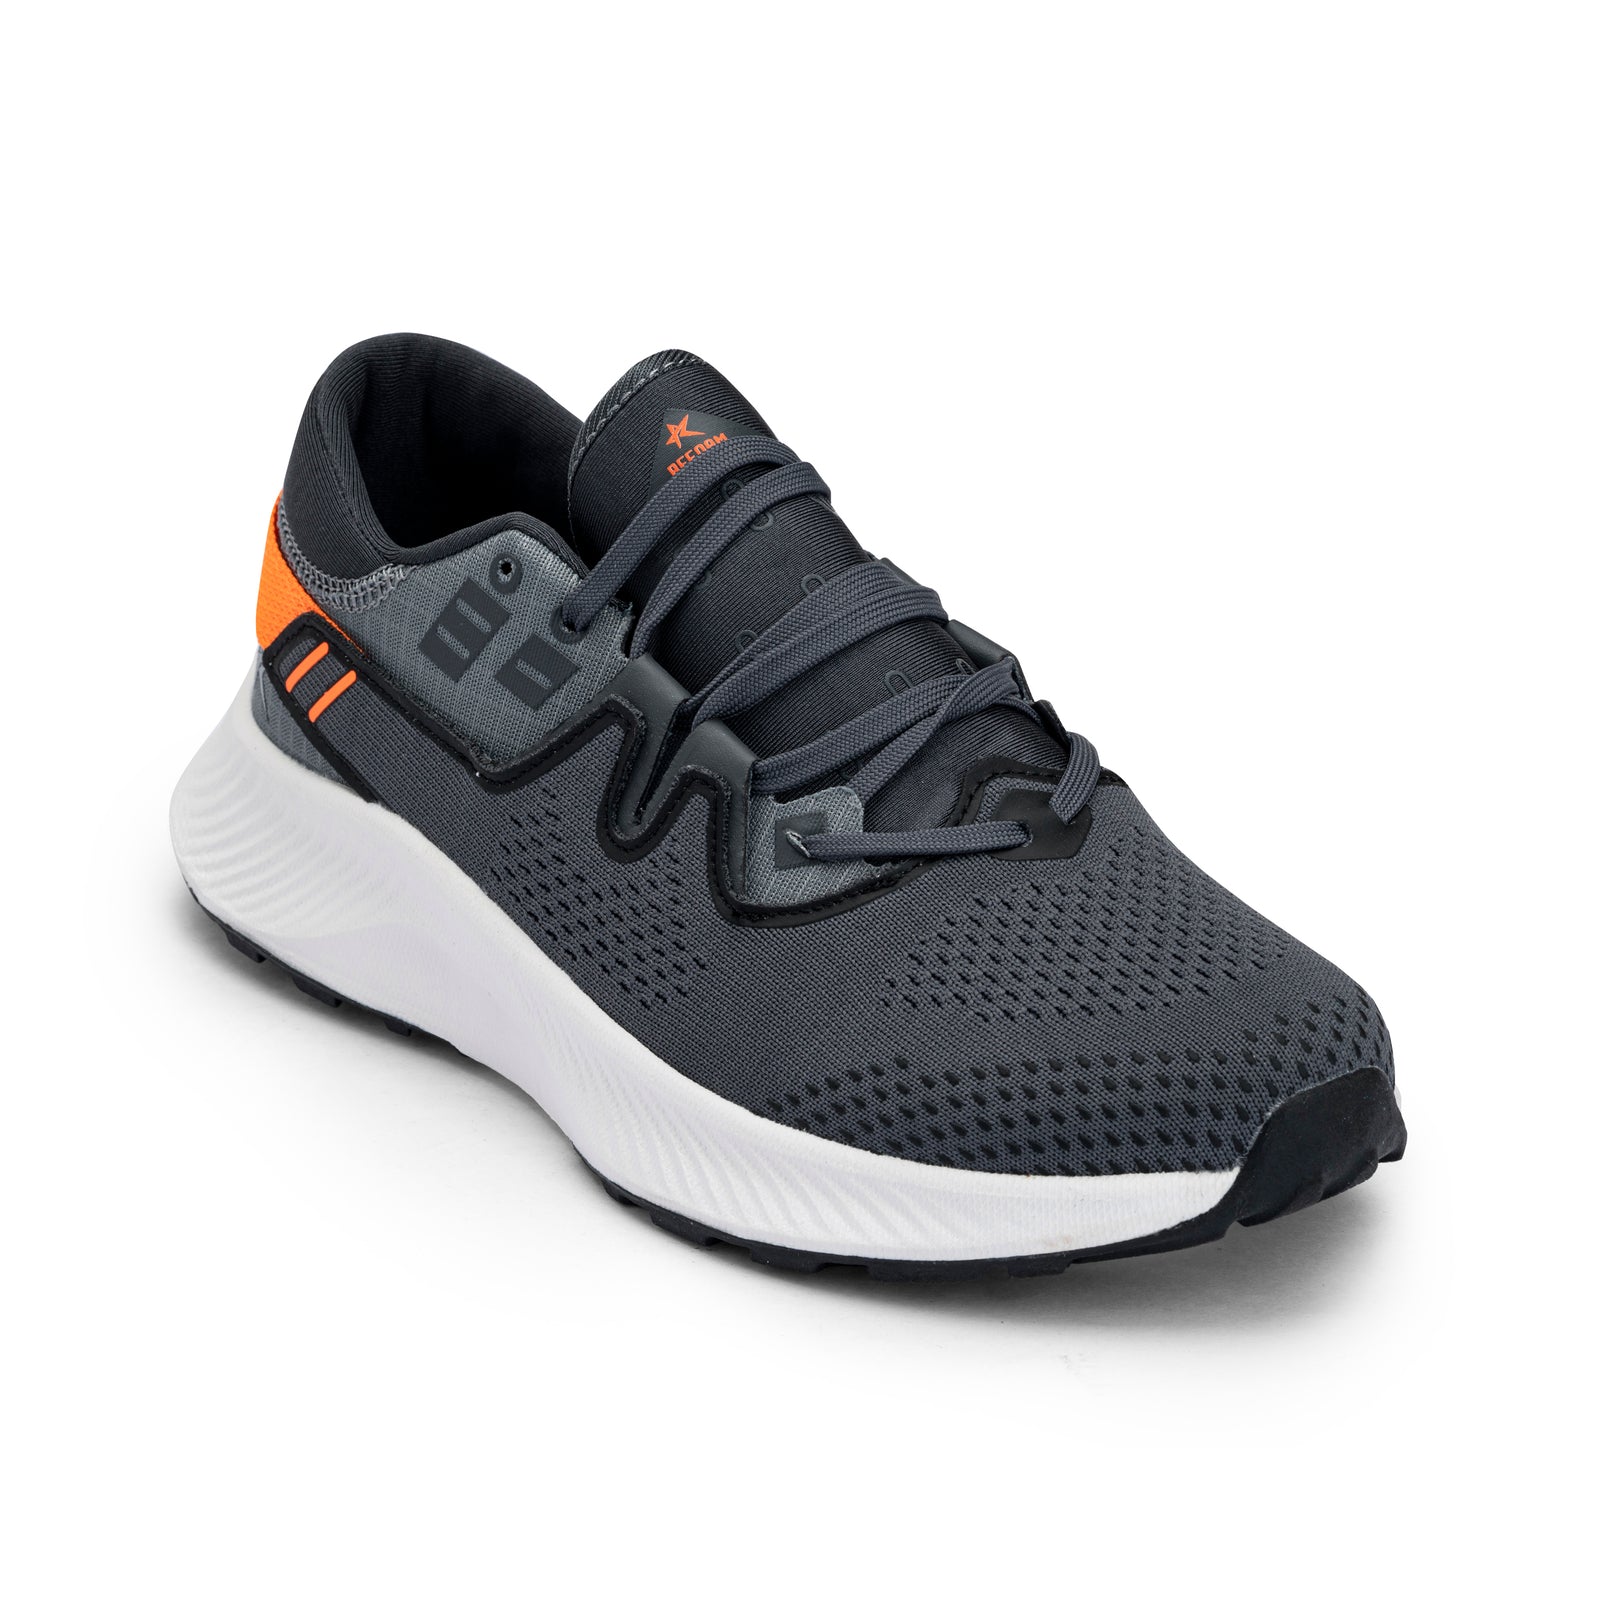 Black Solid Mesh Lace Up Running Sport Shoes For Men